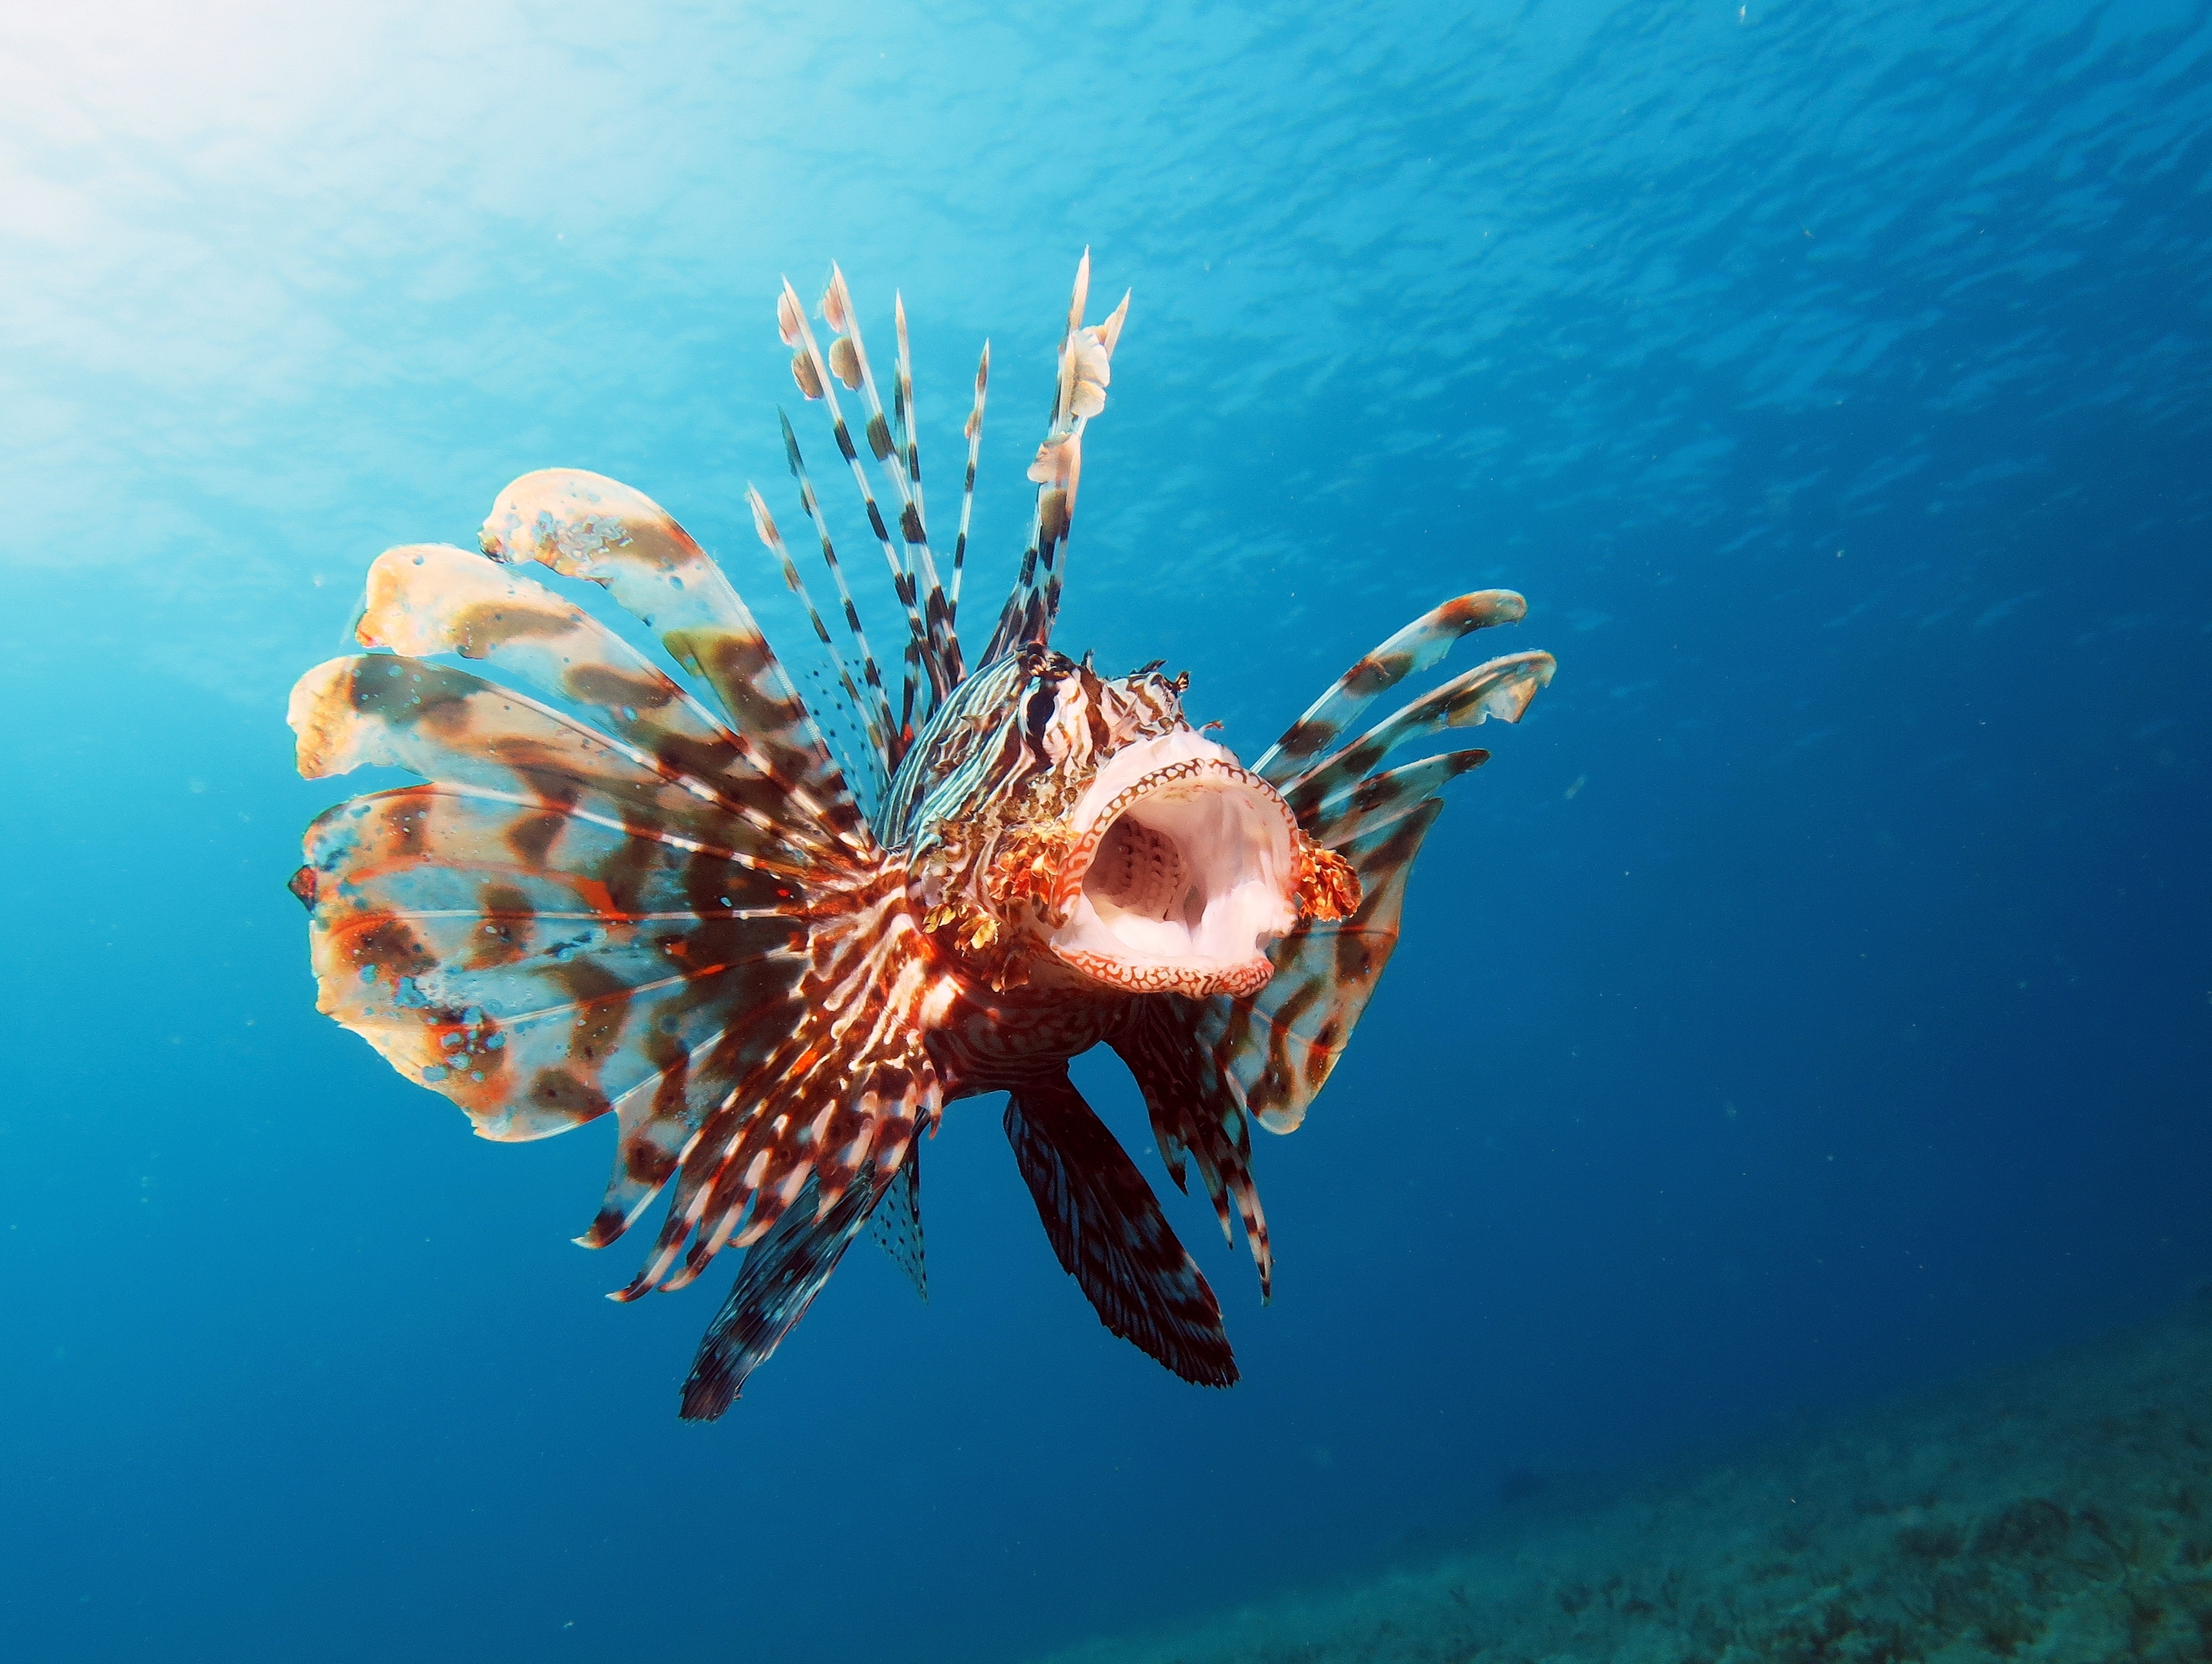 Invasive lionfish are delicious — but is it safe to eat them? | Oceana